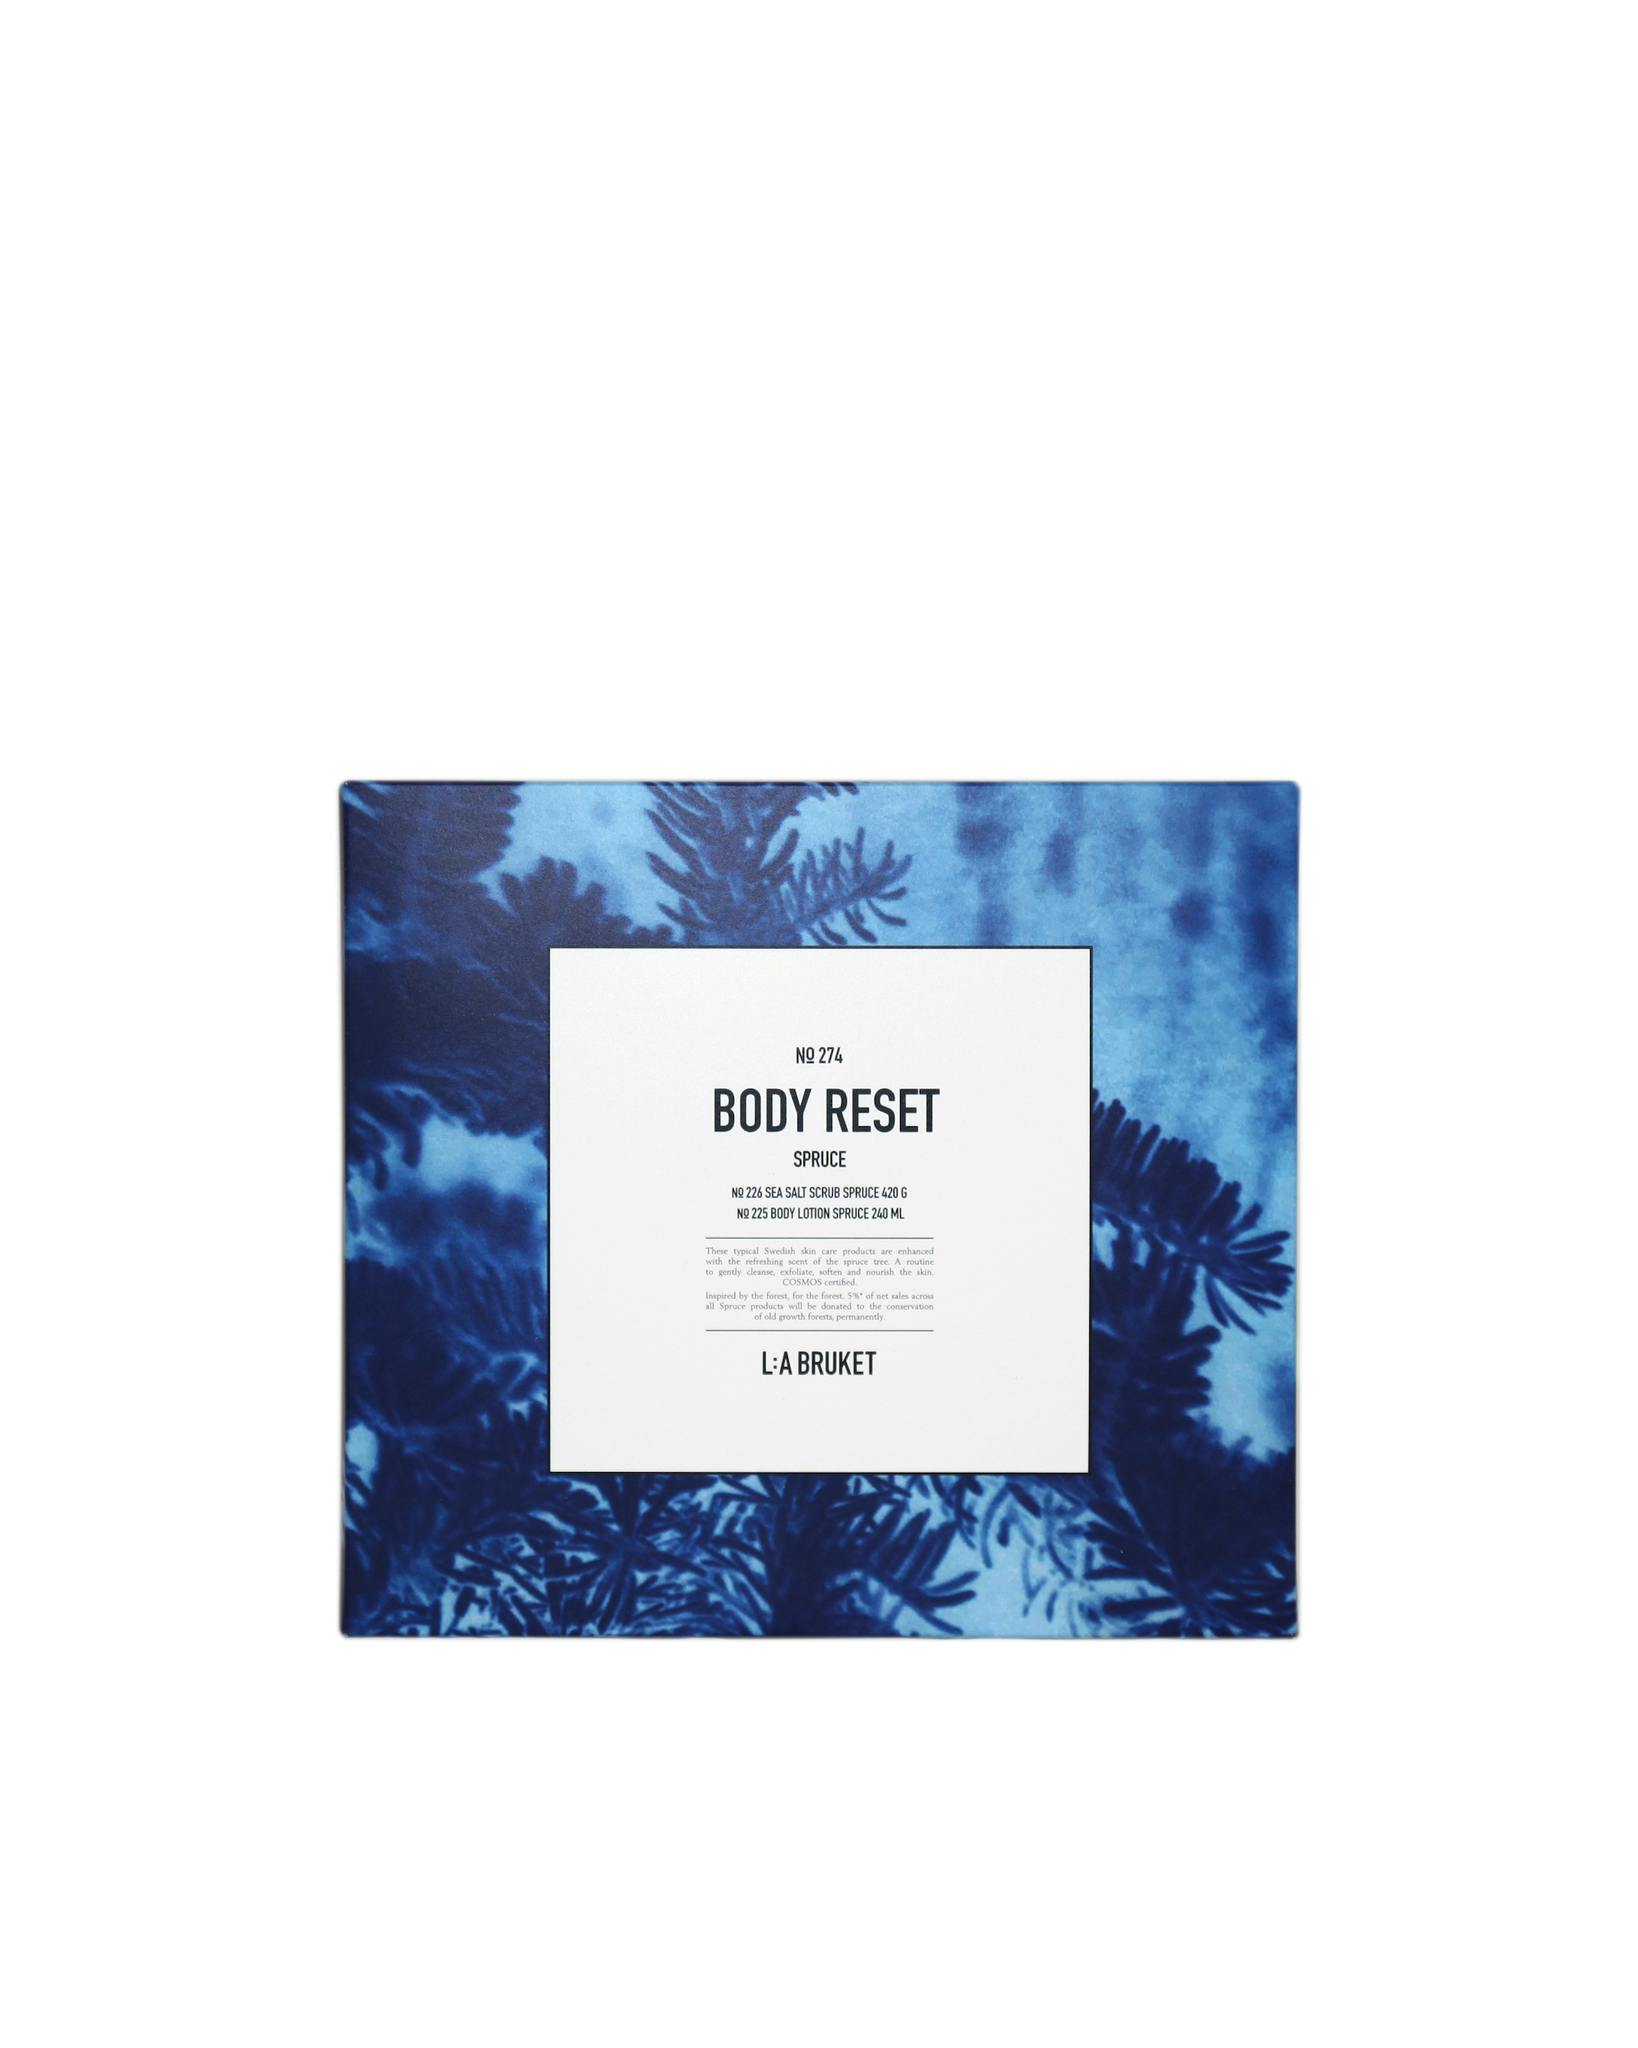 A special gift set full of Nordic nature with a sea salt scrub and body lotion scented of the Northern pine forests.